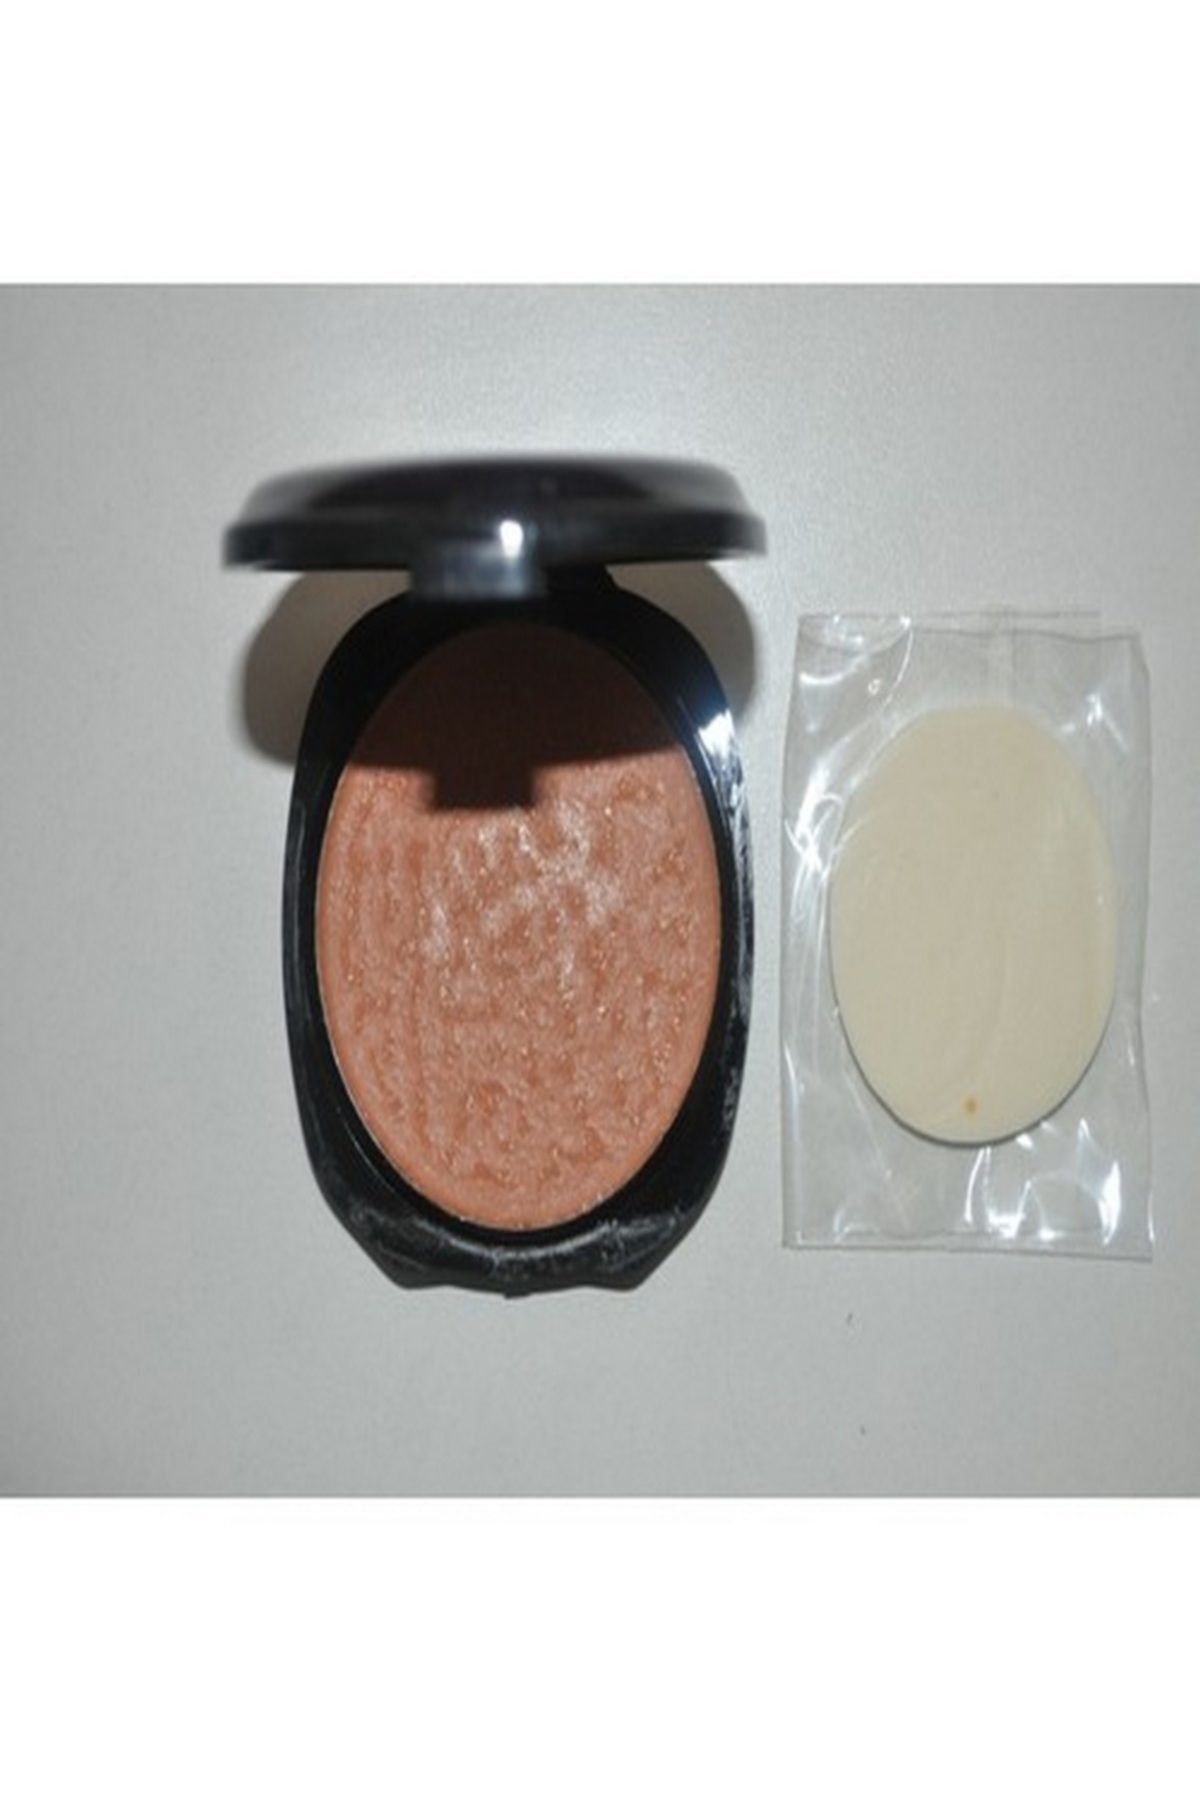 Catherine Arley Silky Touch Cream Compact 06